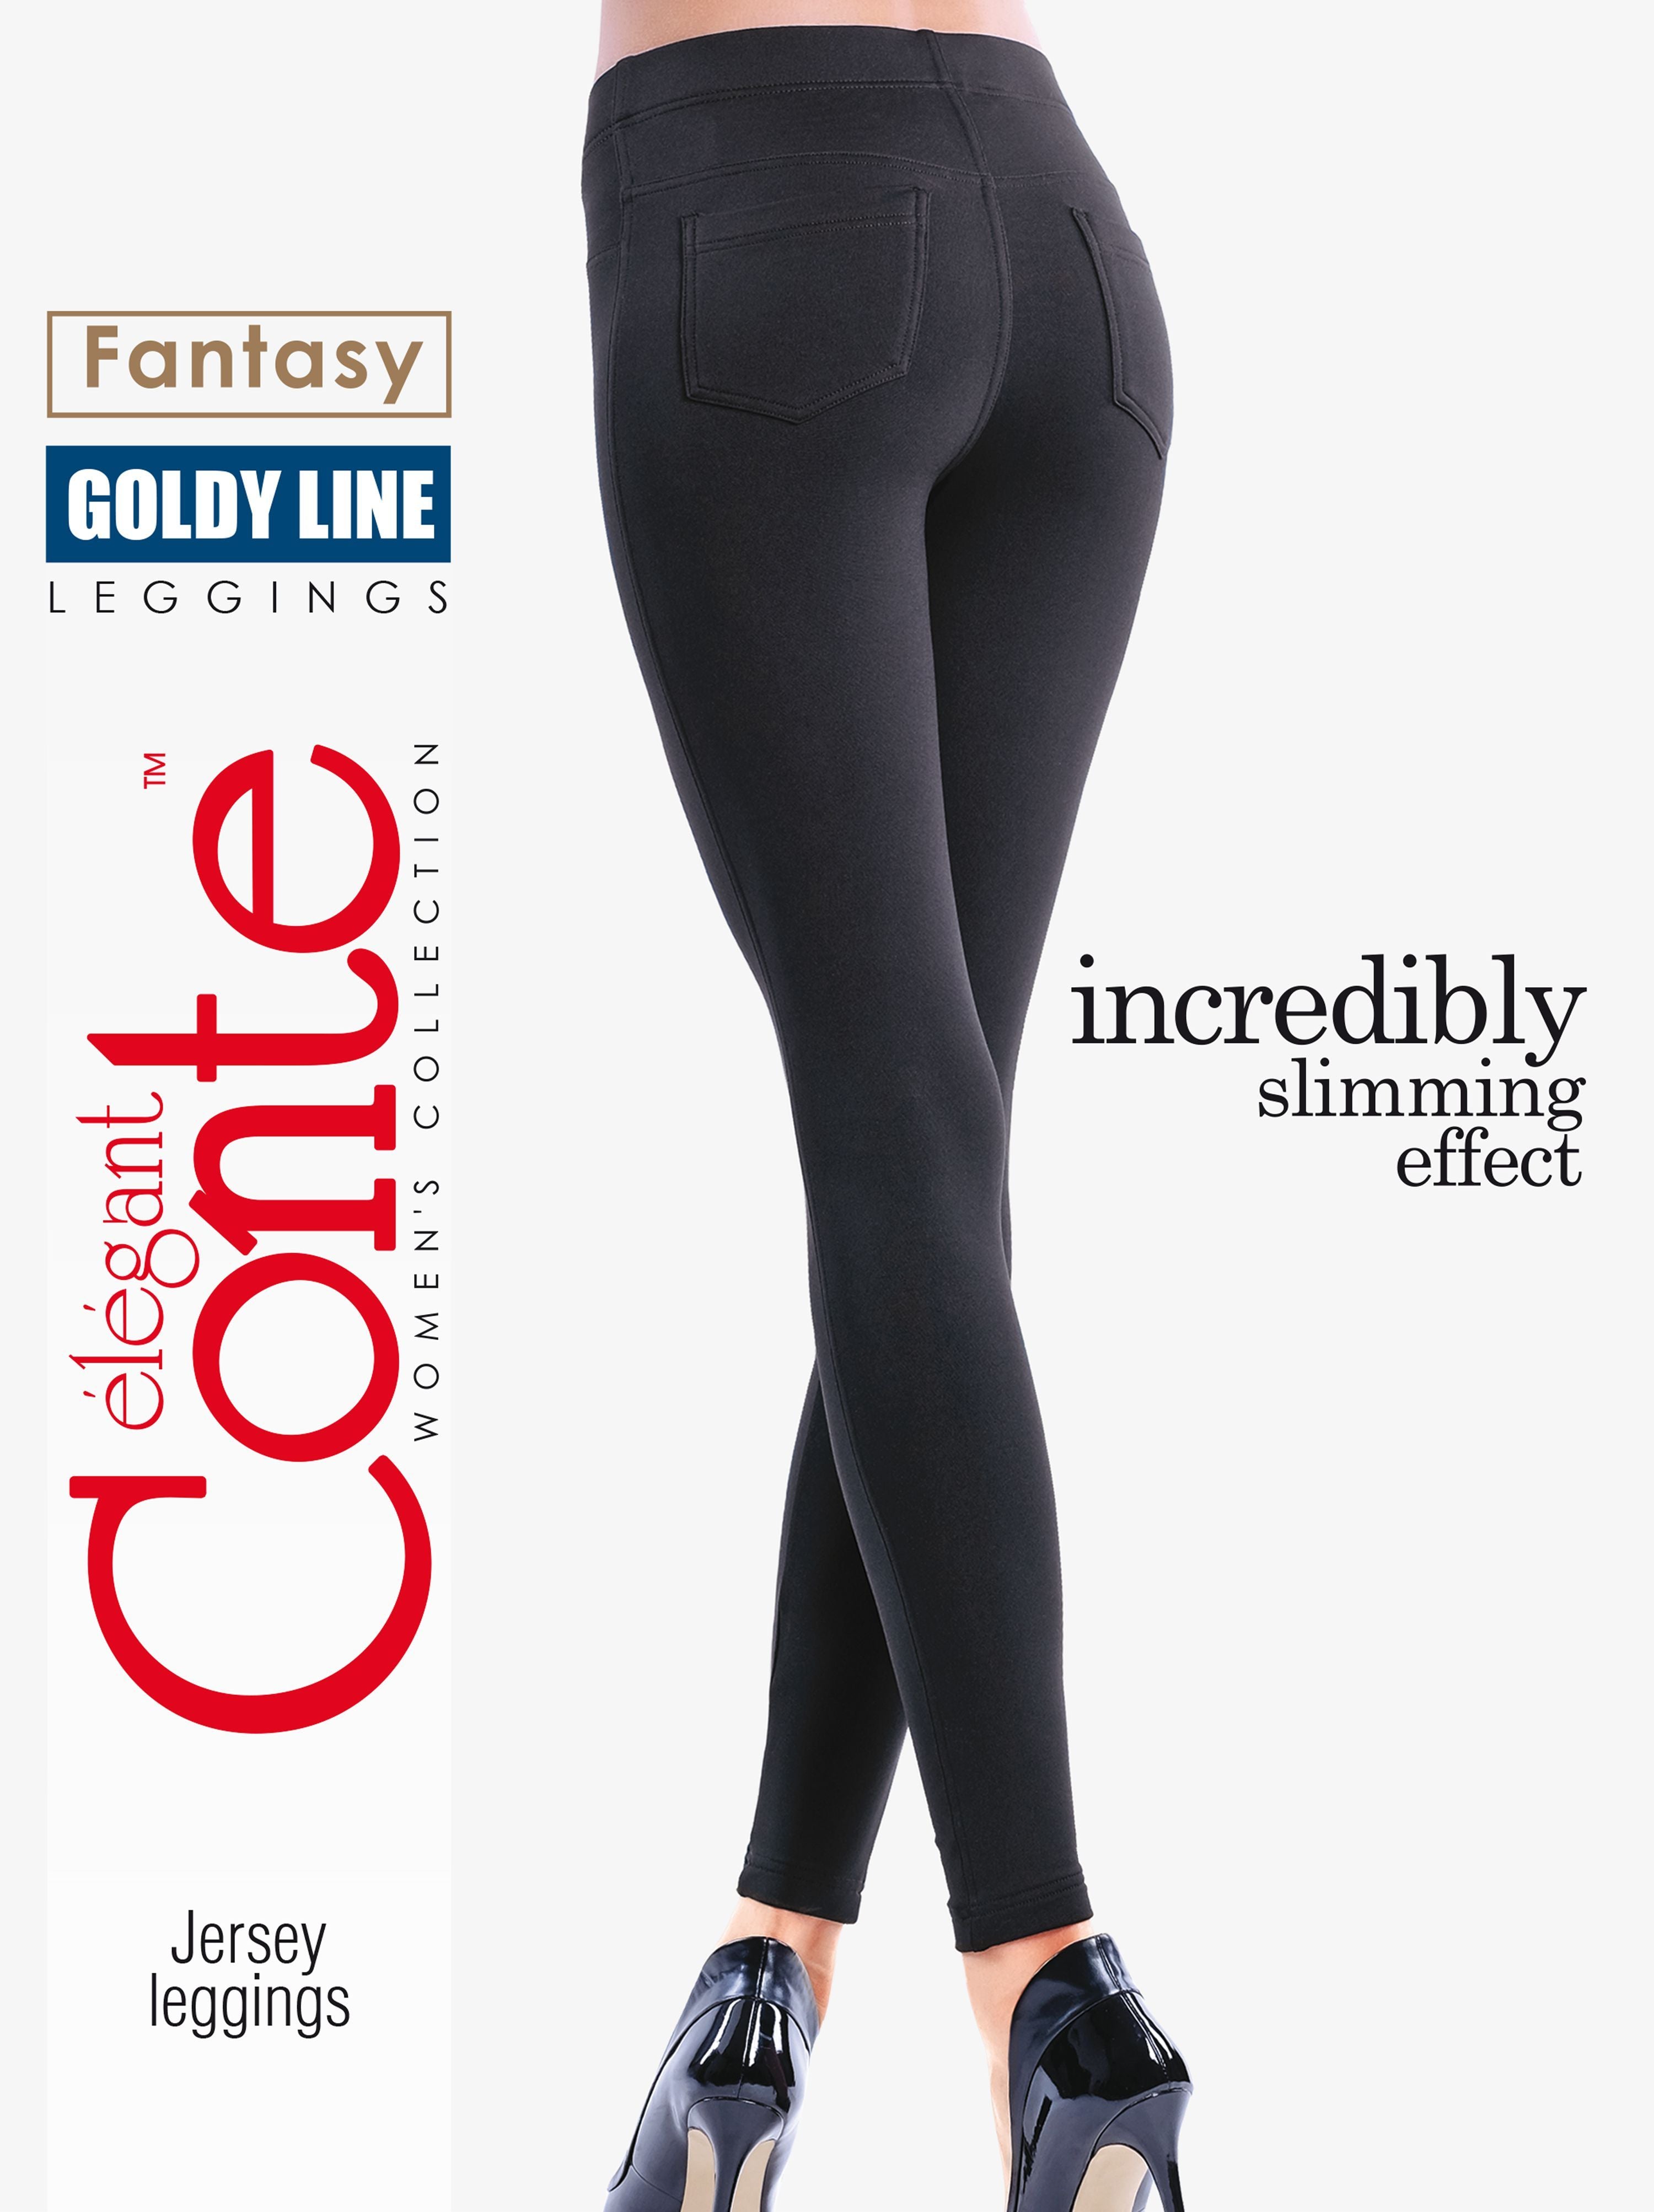 Black leggings for women with pockets Conte Goldy Line - rear view, packaging photo